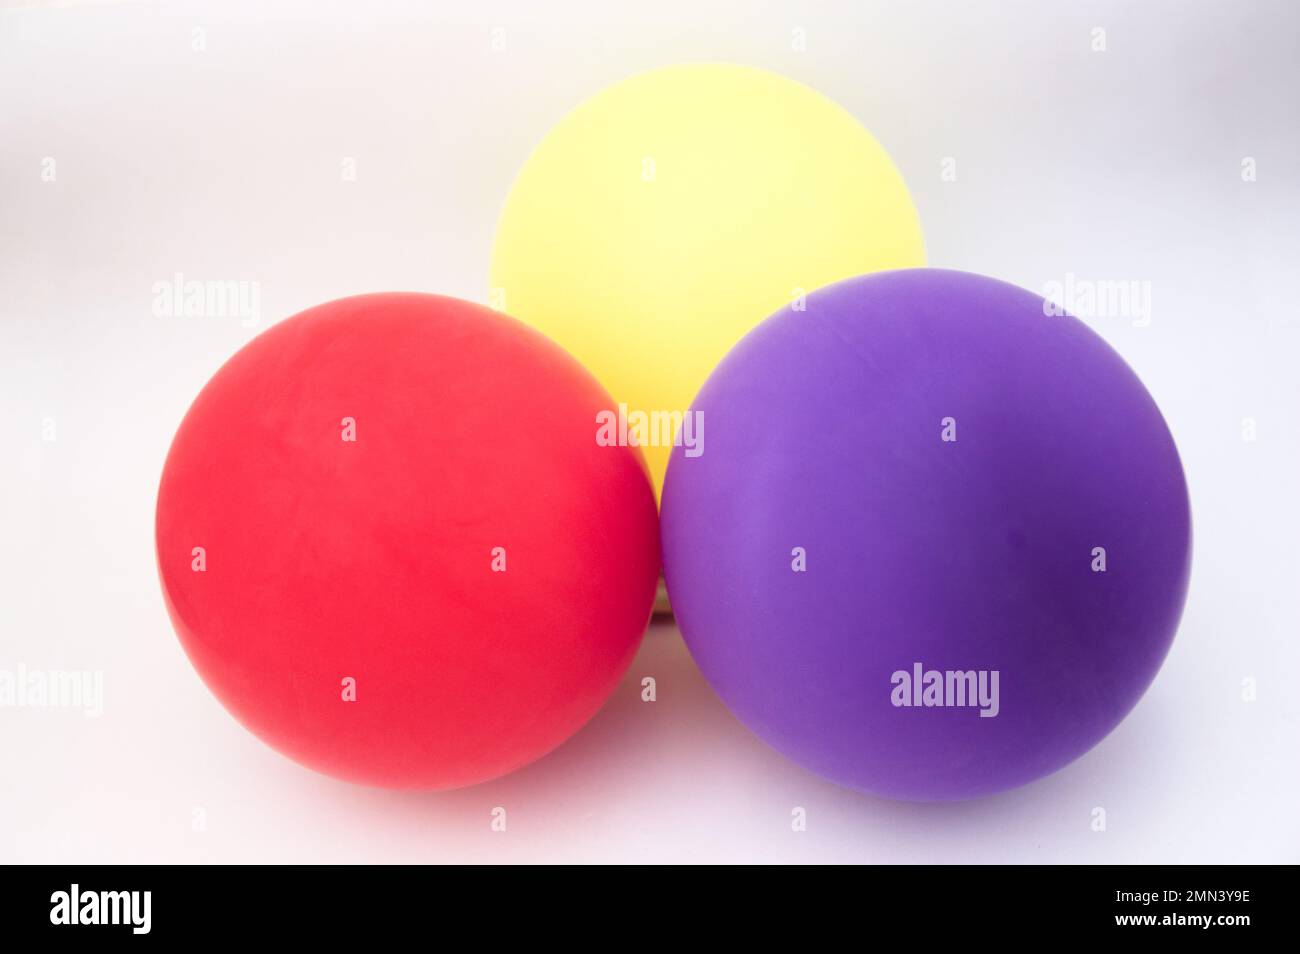 Three inflated balloons of the colors red, yellow and purple represent the republican flag in Spain on a neutral background Stock Photo